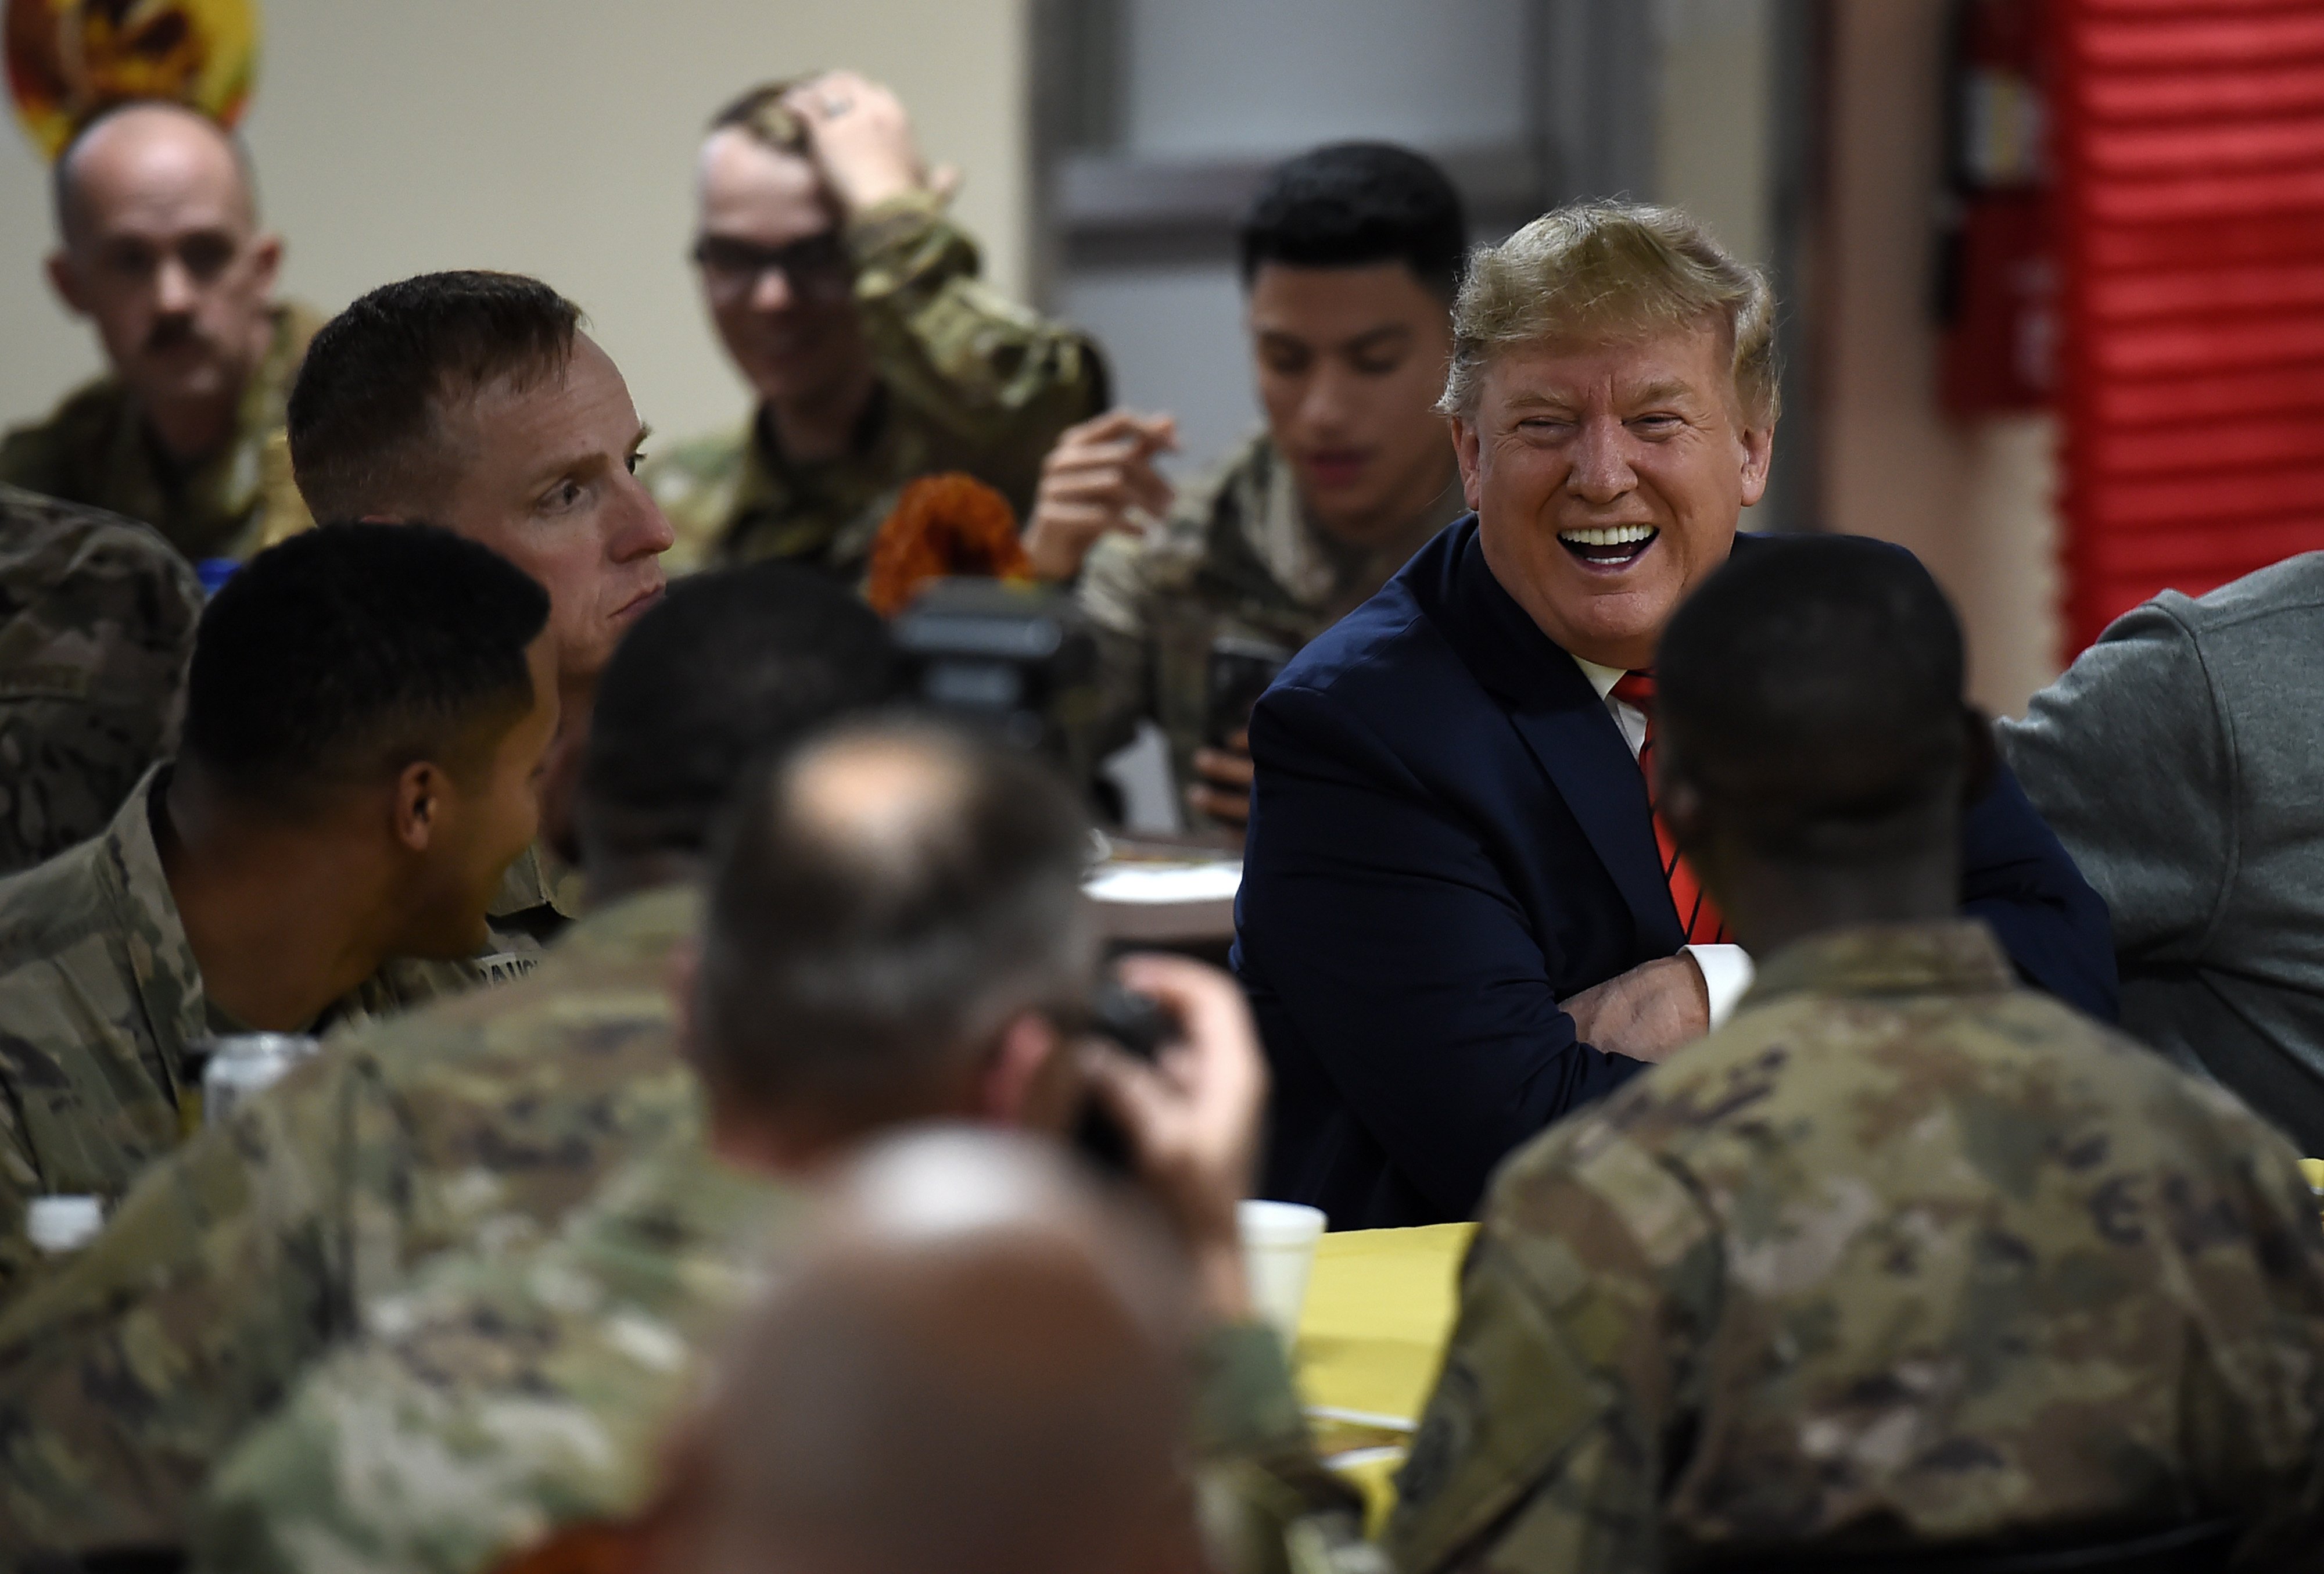 US President Donald Trump serves Thanksgiving dinner to US troops at Bagram Air Field during a surprise visit on November 28, 2019 in Afghanistan. (OLIVIER DOULIERY/AFP via Getty Images)